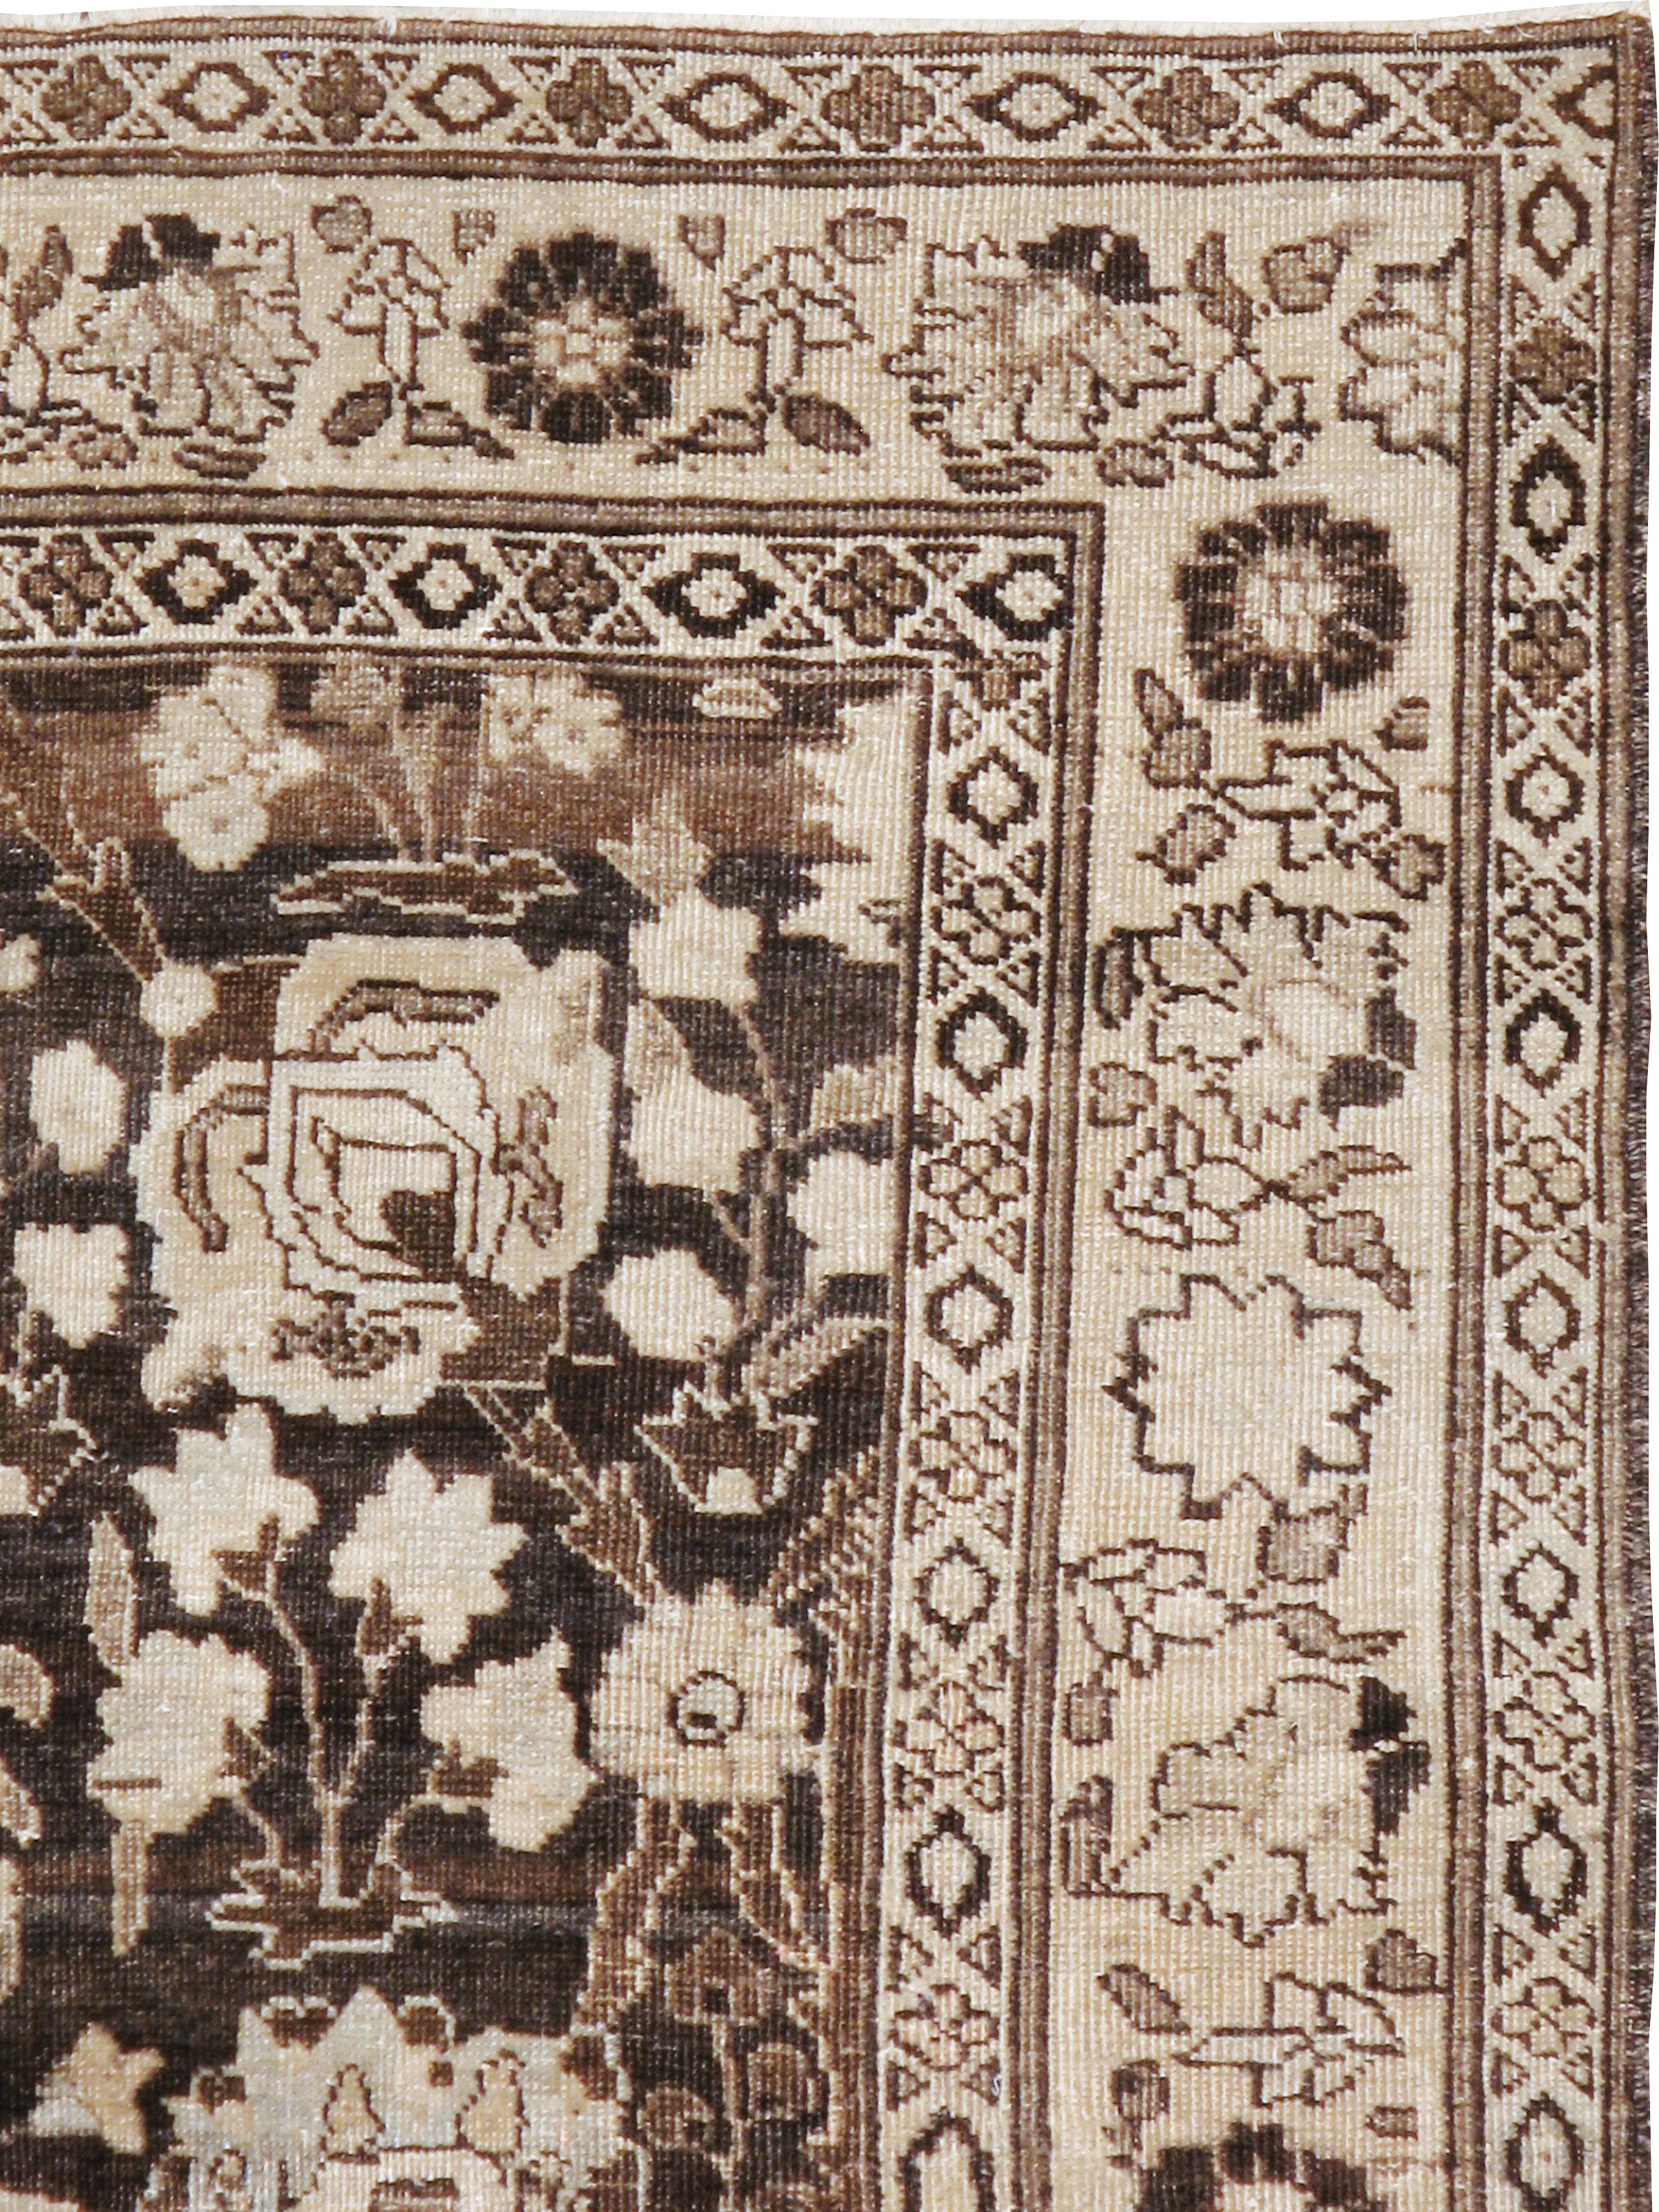 An antique Persian Tabriz rug from the early 20th century. A vase with a flowering prunus spray is a standout feature of the one-way palmette and garden flower pattern on the charcoal brown ground of this NW Persian city scatter. This is really a